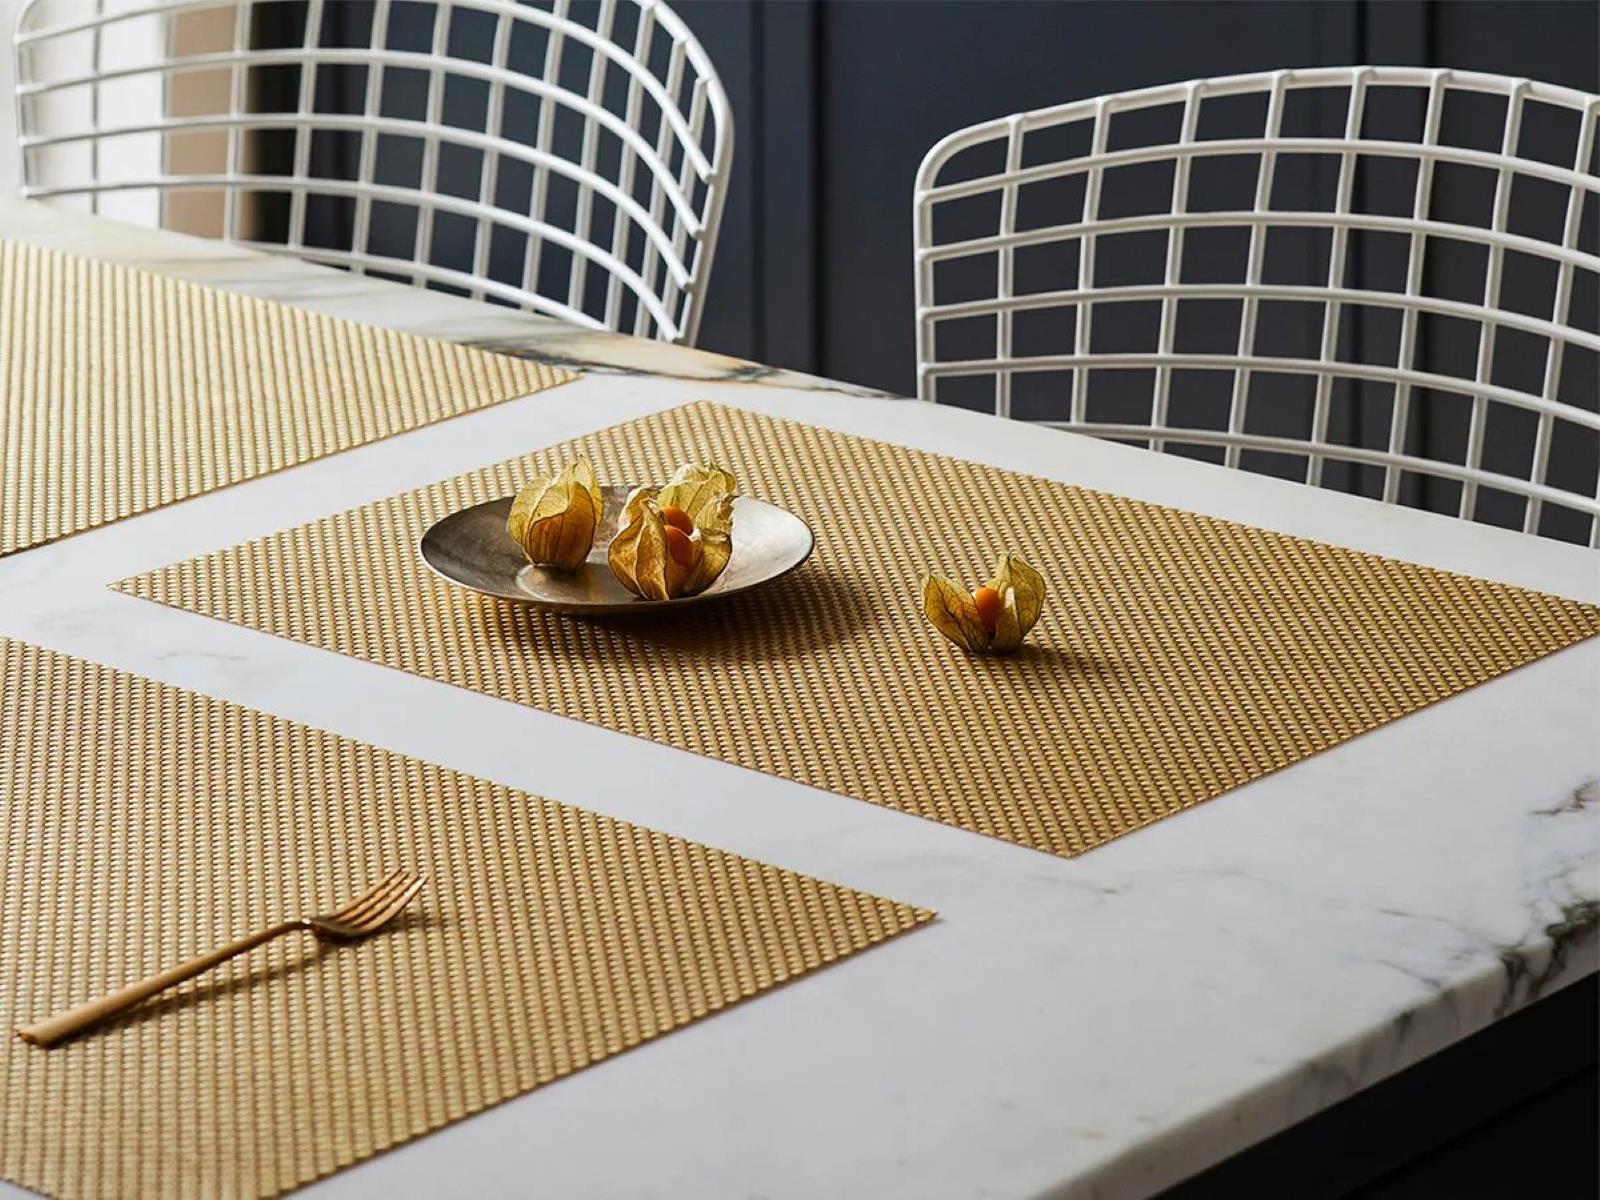 How To Keep Table Placemats From Sliding